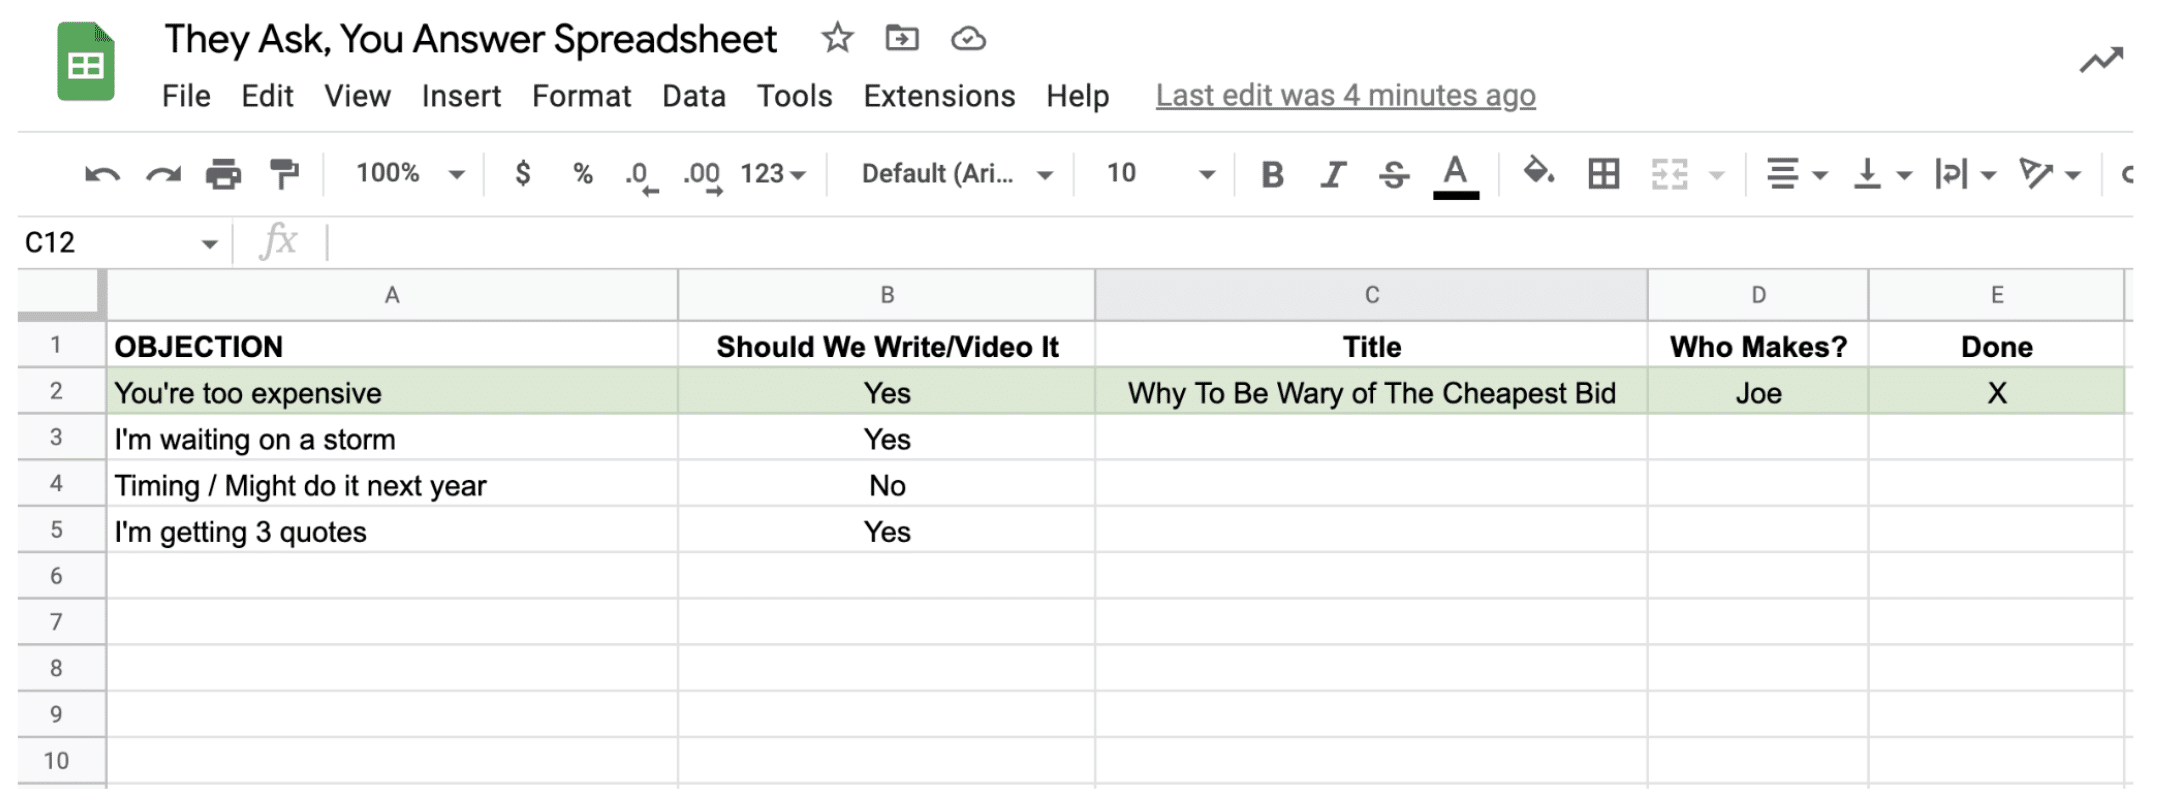 They ask, you answer spreadsheet